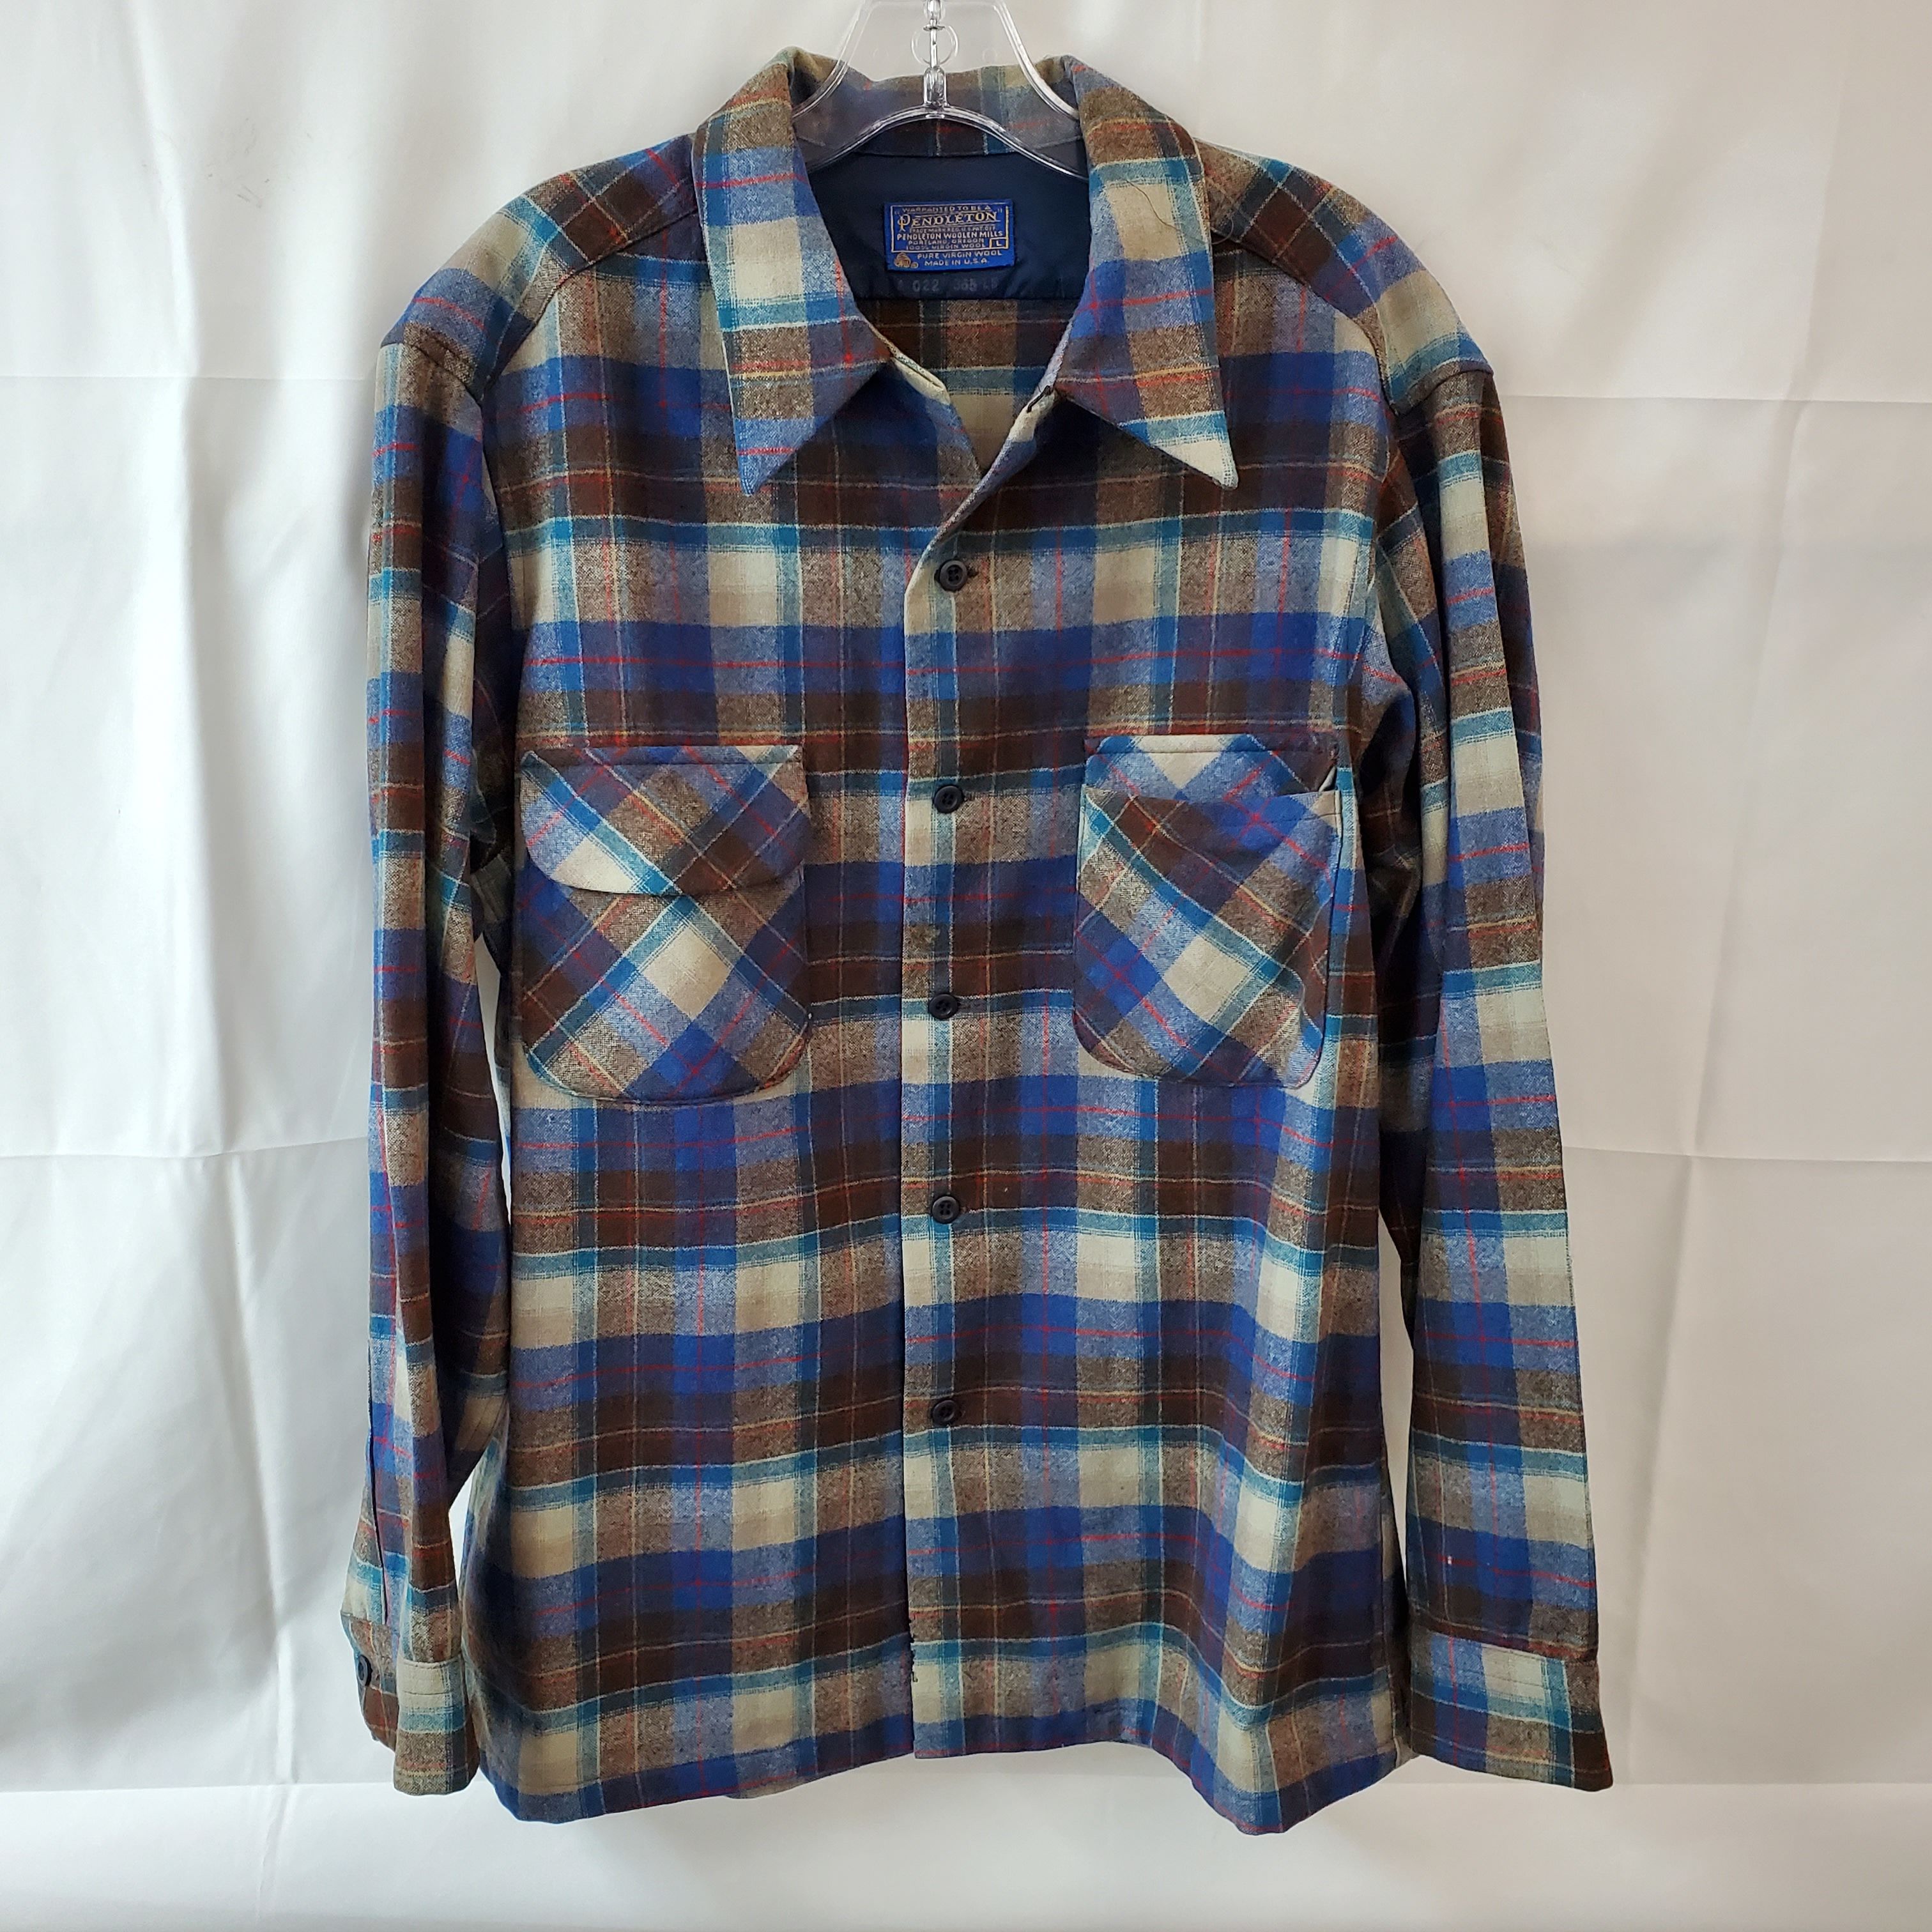 Buy the Blue and Brown Plaid Virgin Wool Long Sleeve Button-Up